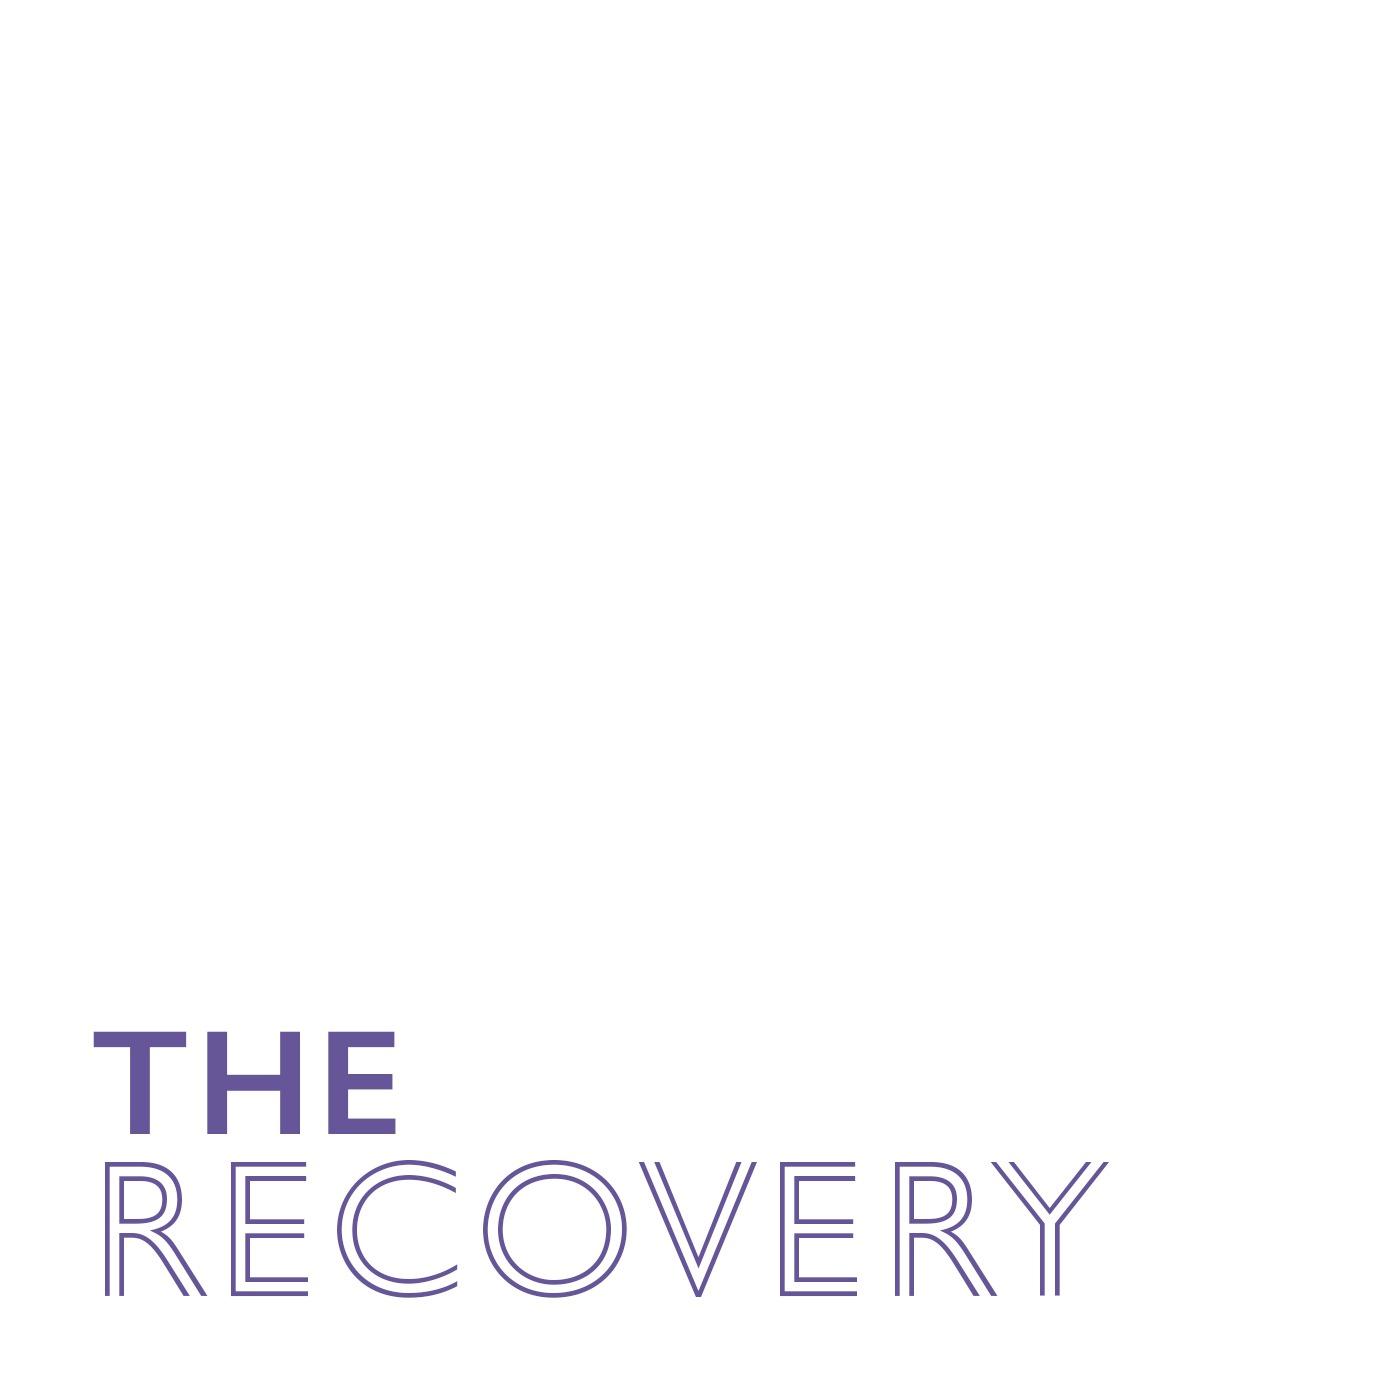 THE RECOVERY